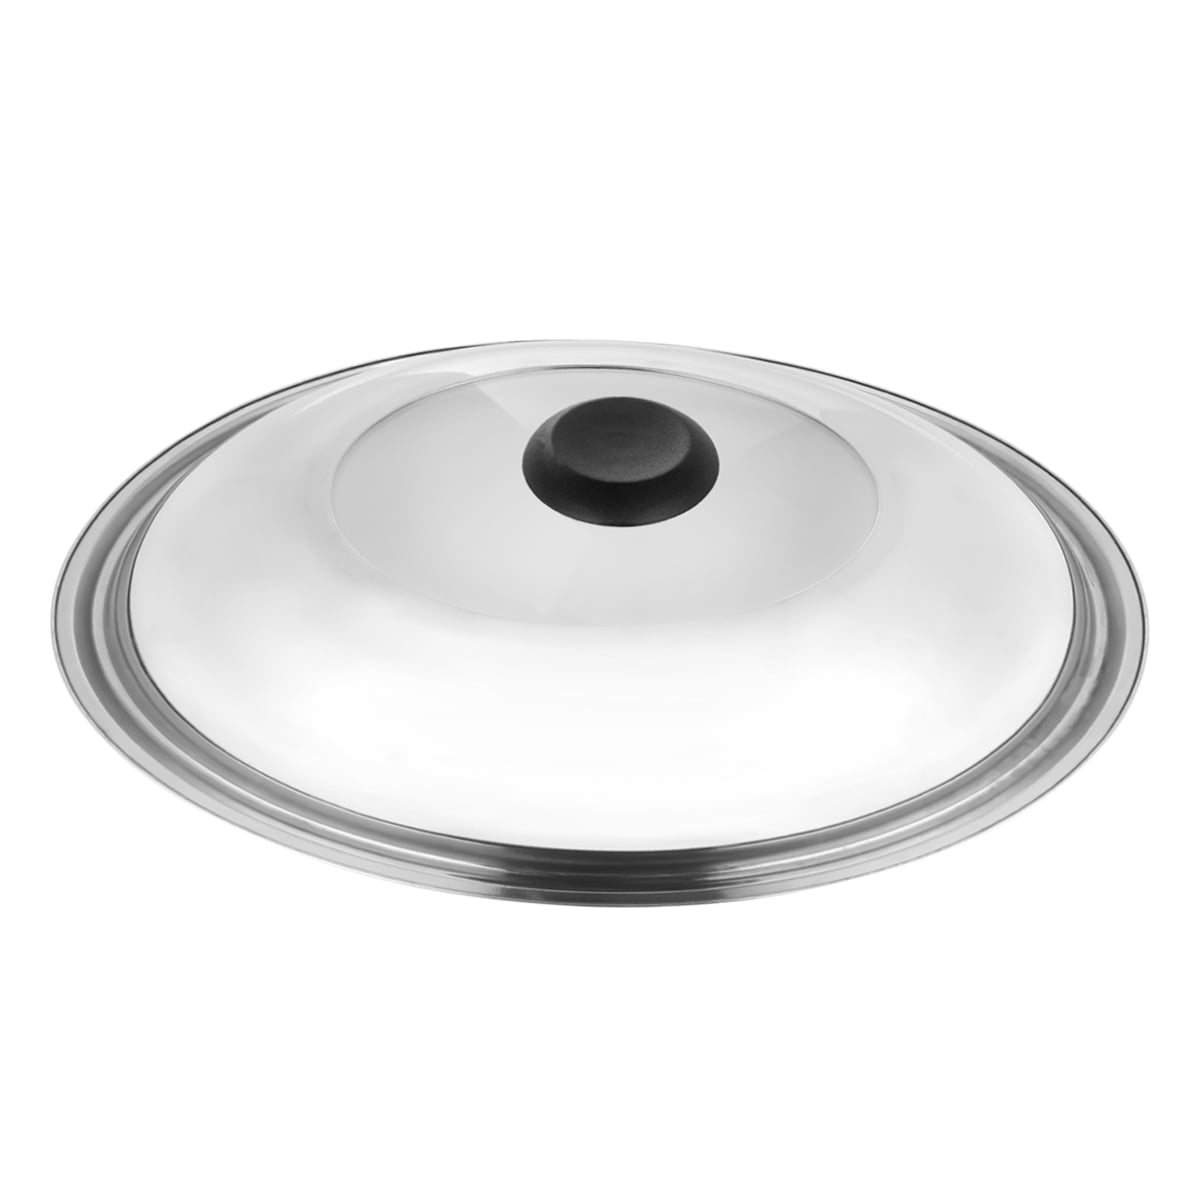 Hemoton Wok Cover Dome Stainless Steel Pot Lid Universal Pan Lid Glass Lid Frying Pan Cover Cookware Lids for Pots Pans Fry Pan Skillet Stainless